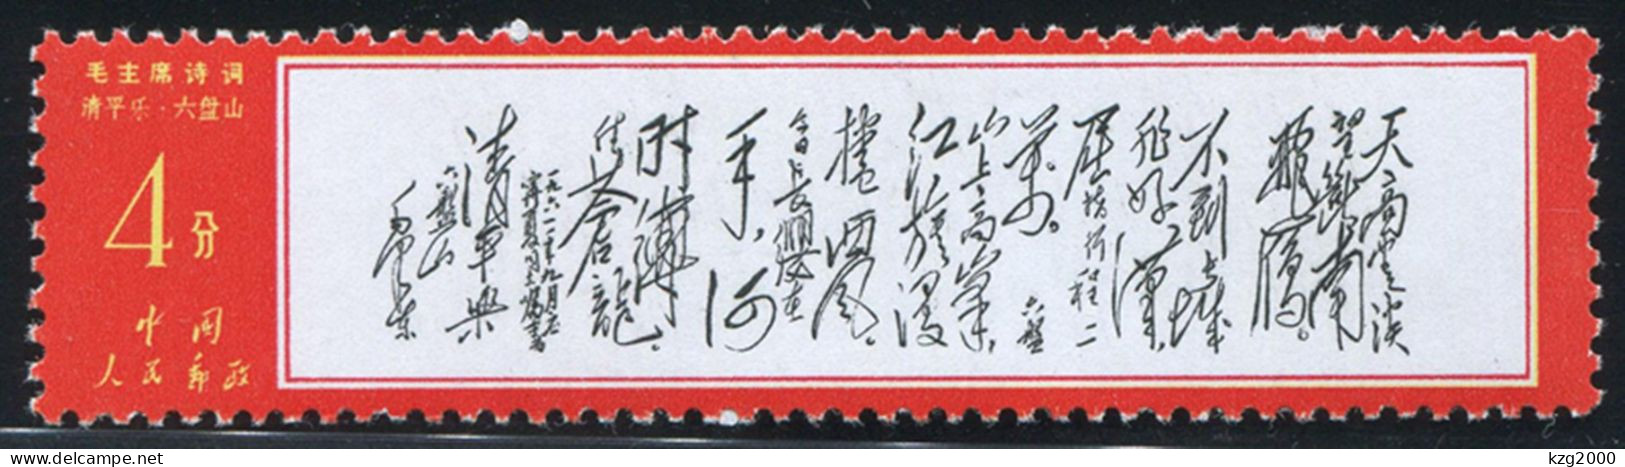 China Stamp 1967 W7 Chairman Mao Poem 4C ( Tian Gao ) OG Stamps - Unused Stamps